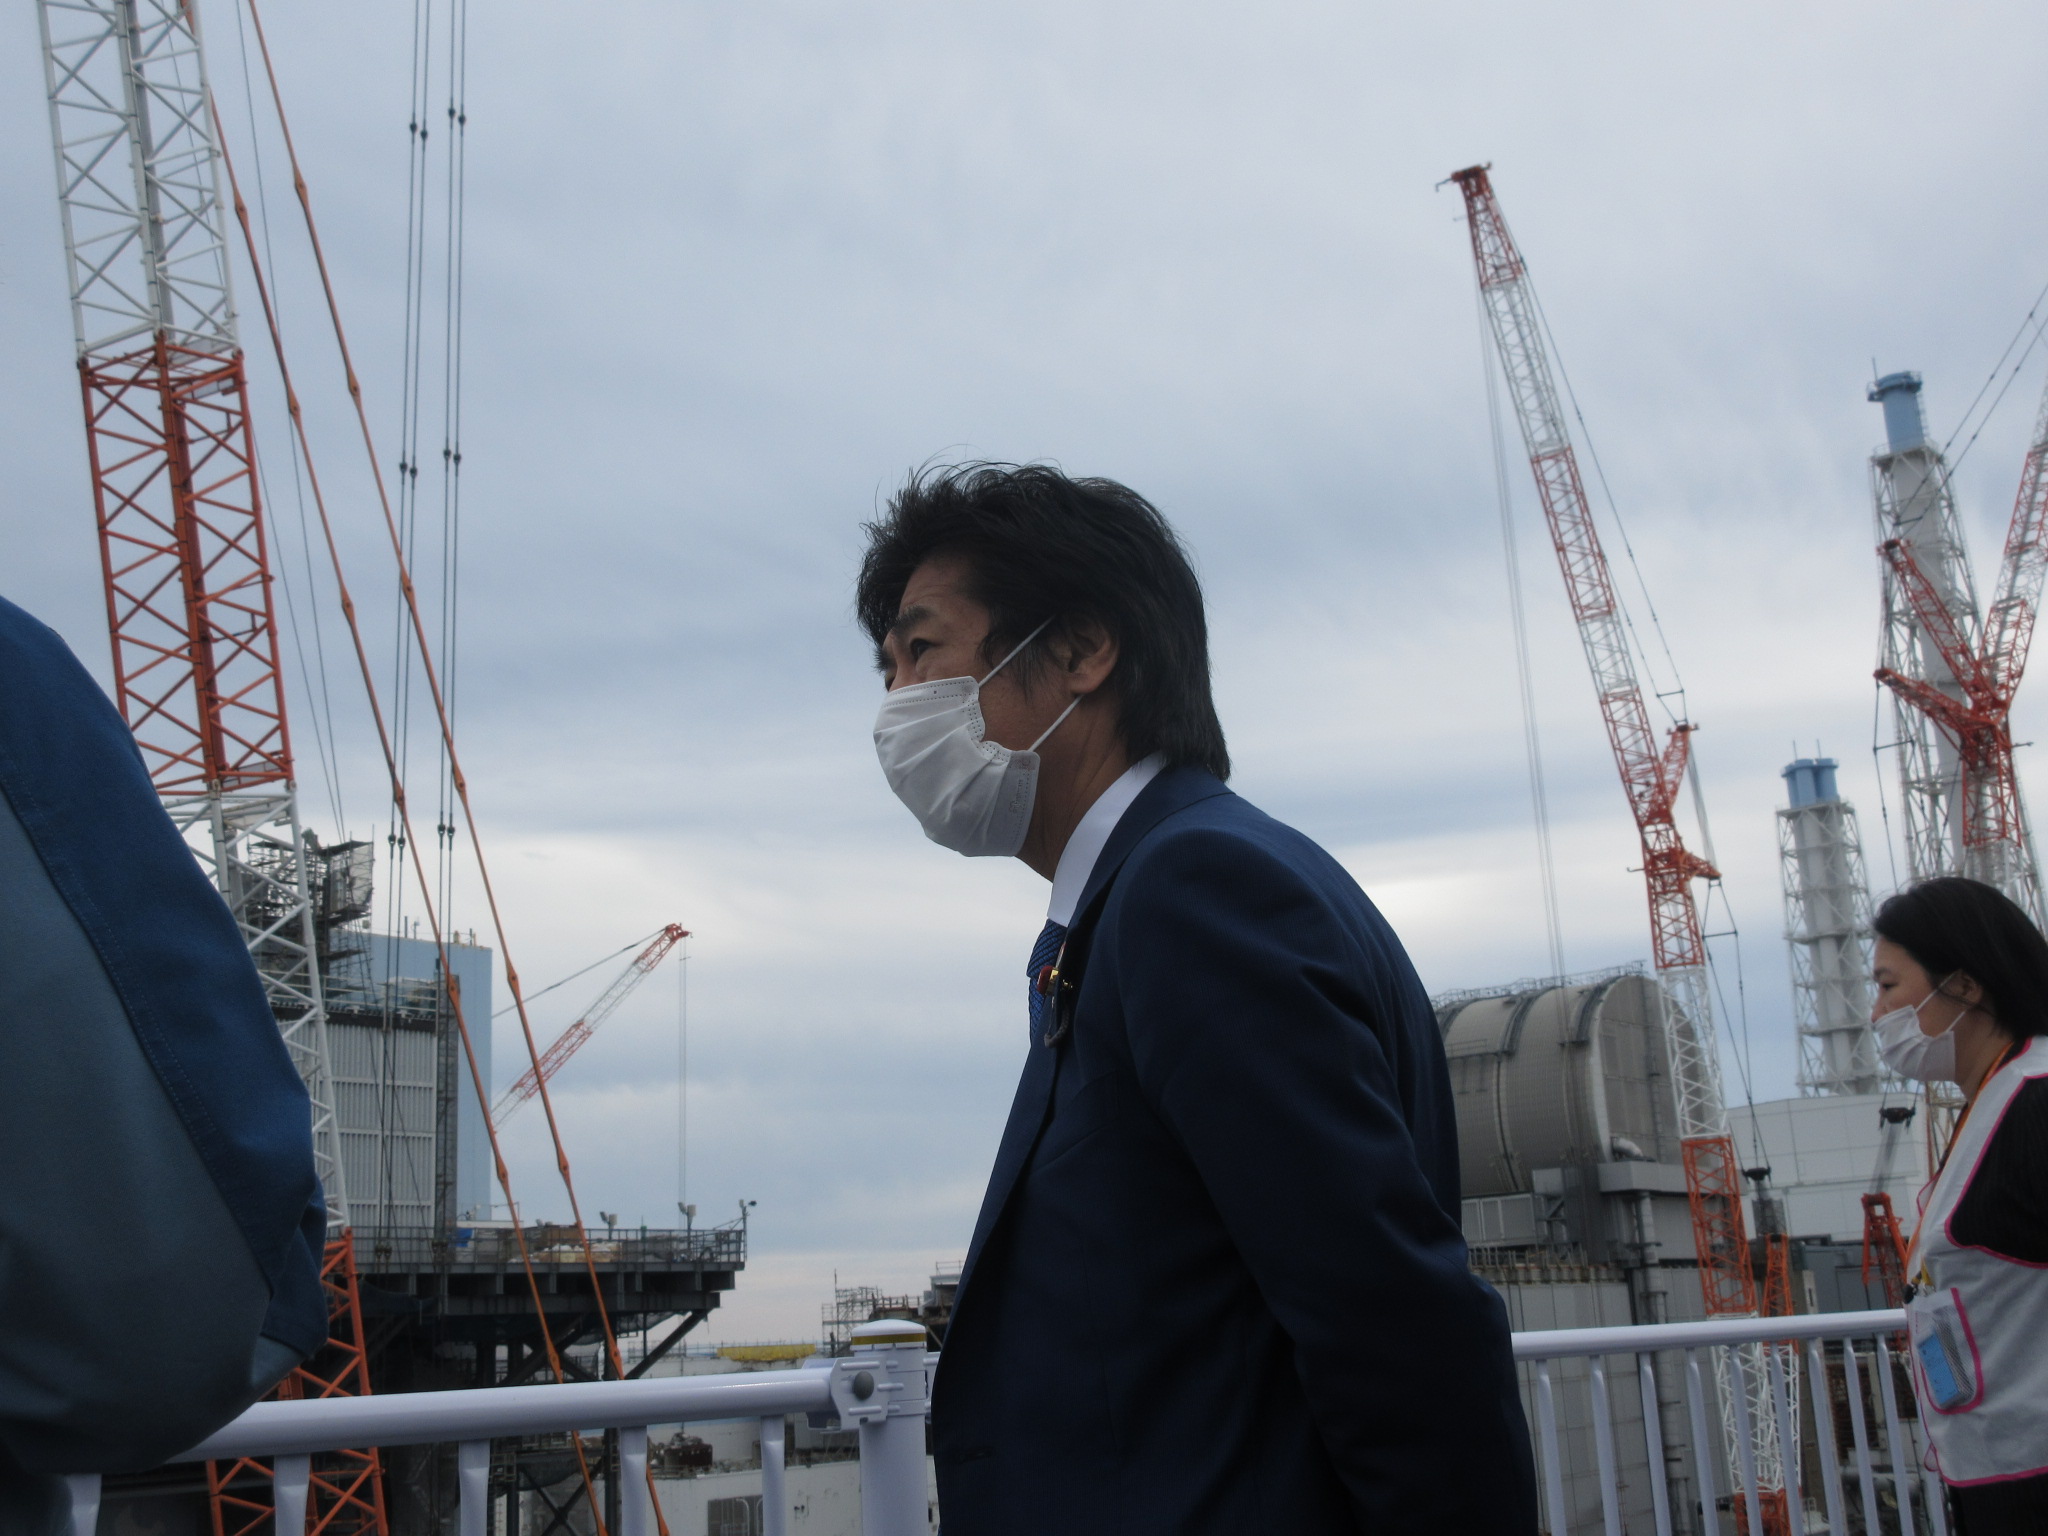 Minister of Health, Labour and Welfare, Norihisa Tamura's, visit to the Fukushima Daiichi Nuclear Power Station (October 18, 2020)